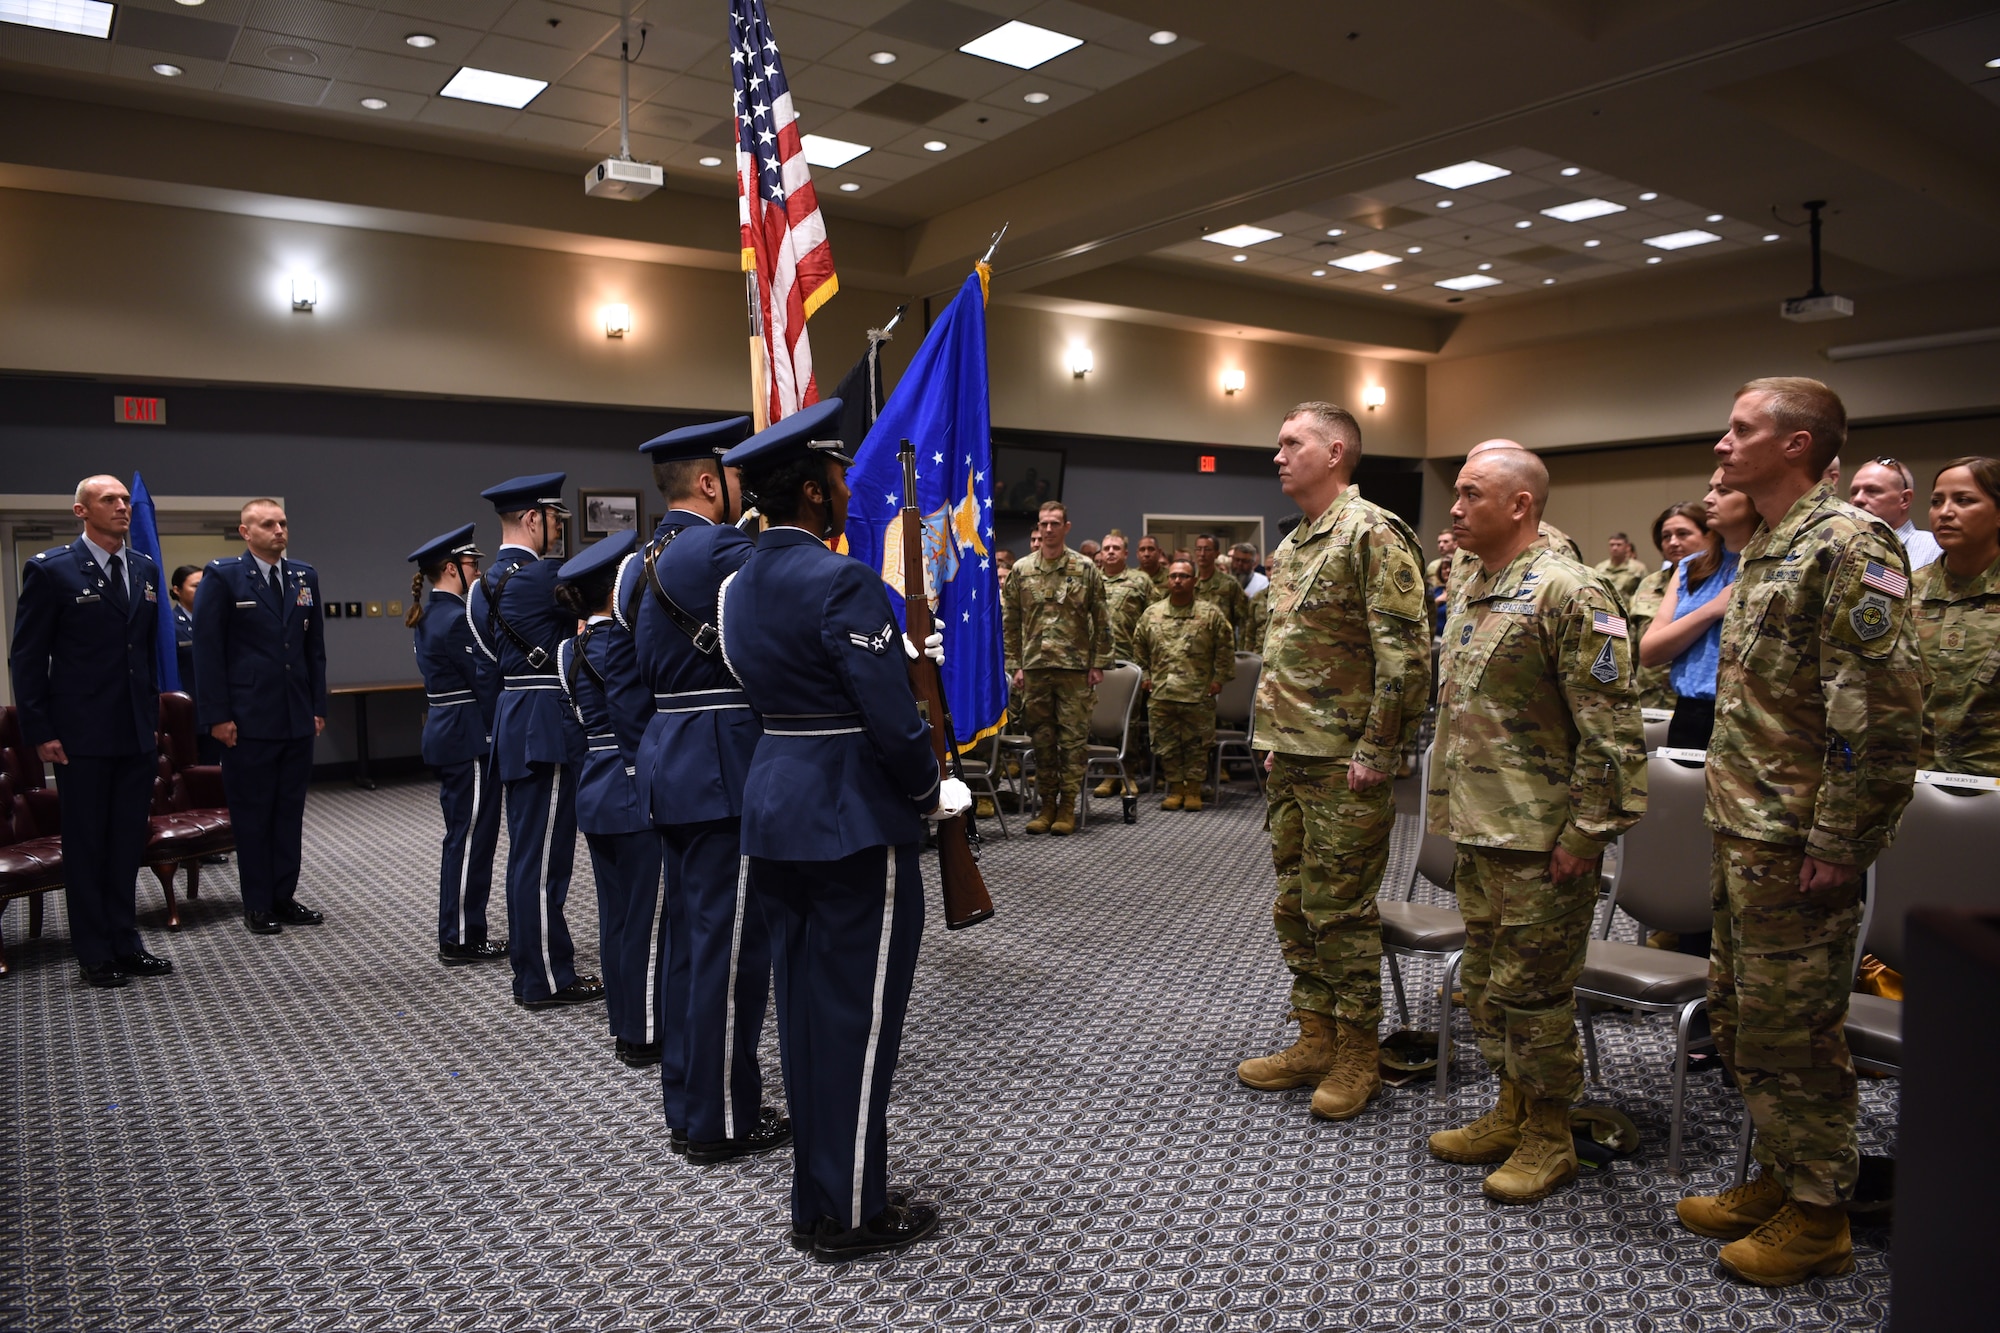 Service members assigned to the 17th Training Wing post the colors during the activation and assumption of responsibility for the 533rd Training Squadron, Detachment 1, at the Powell Event Center, Goodfellow Air Force Base, Texas, June 21, 2022. The activation of the 533rd TRS Det 1 officially establishes the Space Force’s own organized intelligence technical training unit. (U.S. Air Force photo by Senior Airman Abbey Rieves)